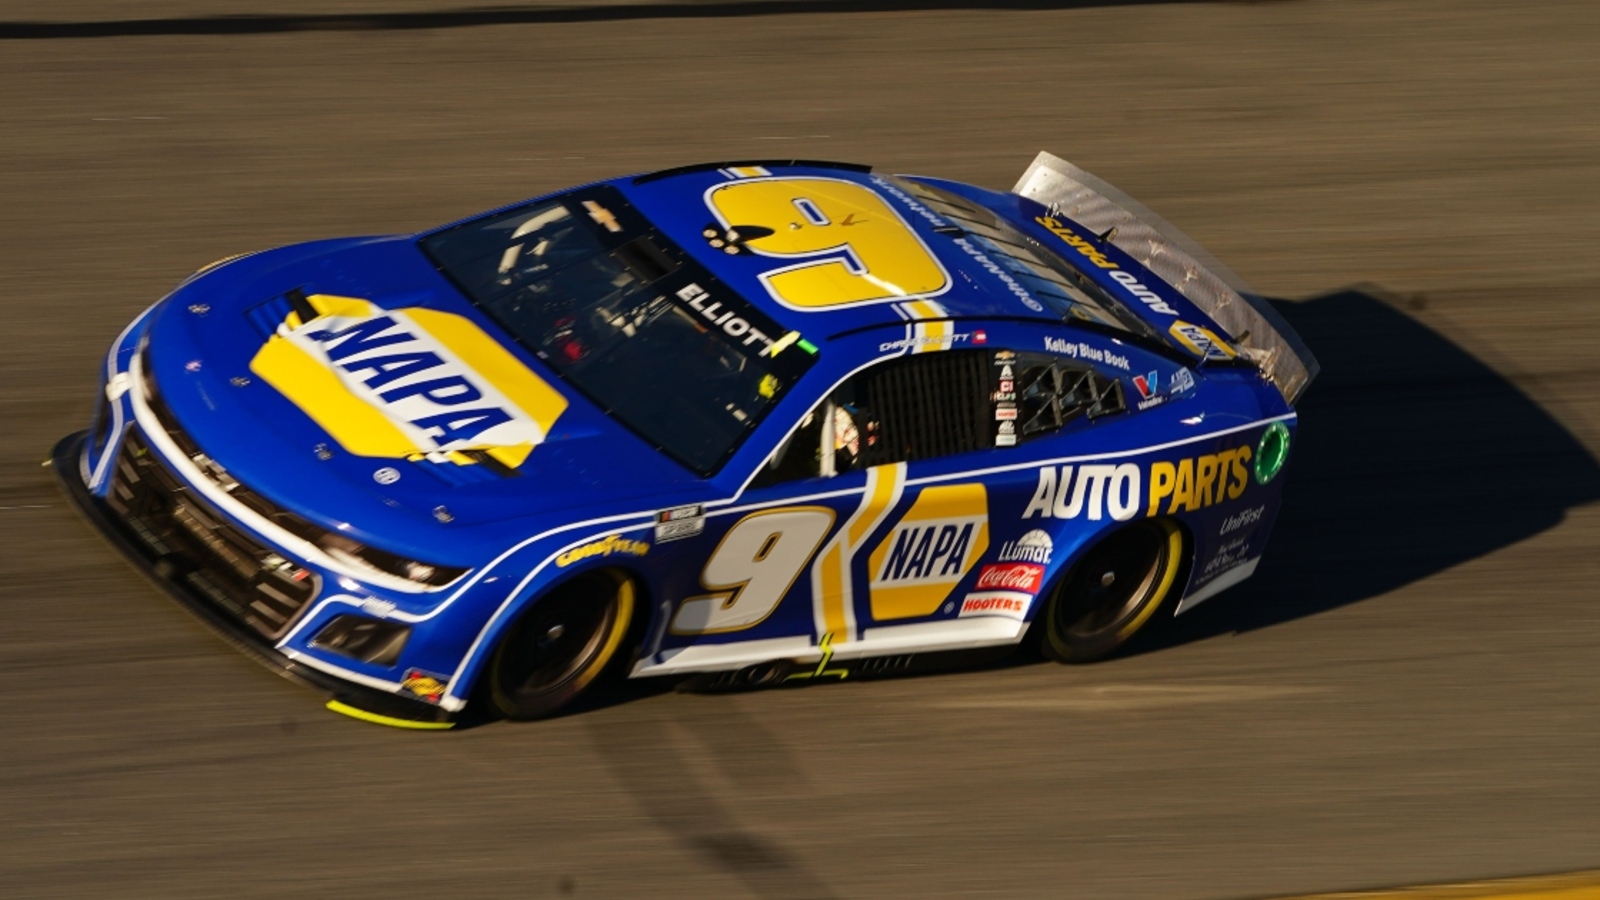 Chase Elliott to start at the rear for ‘unapproved adjustments’ ahead of Ambetter Health 400